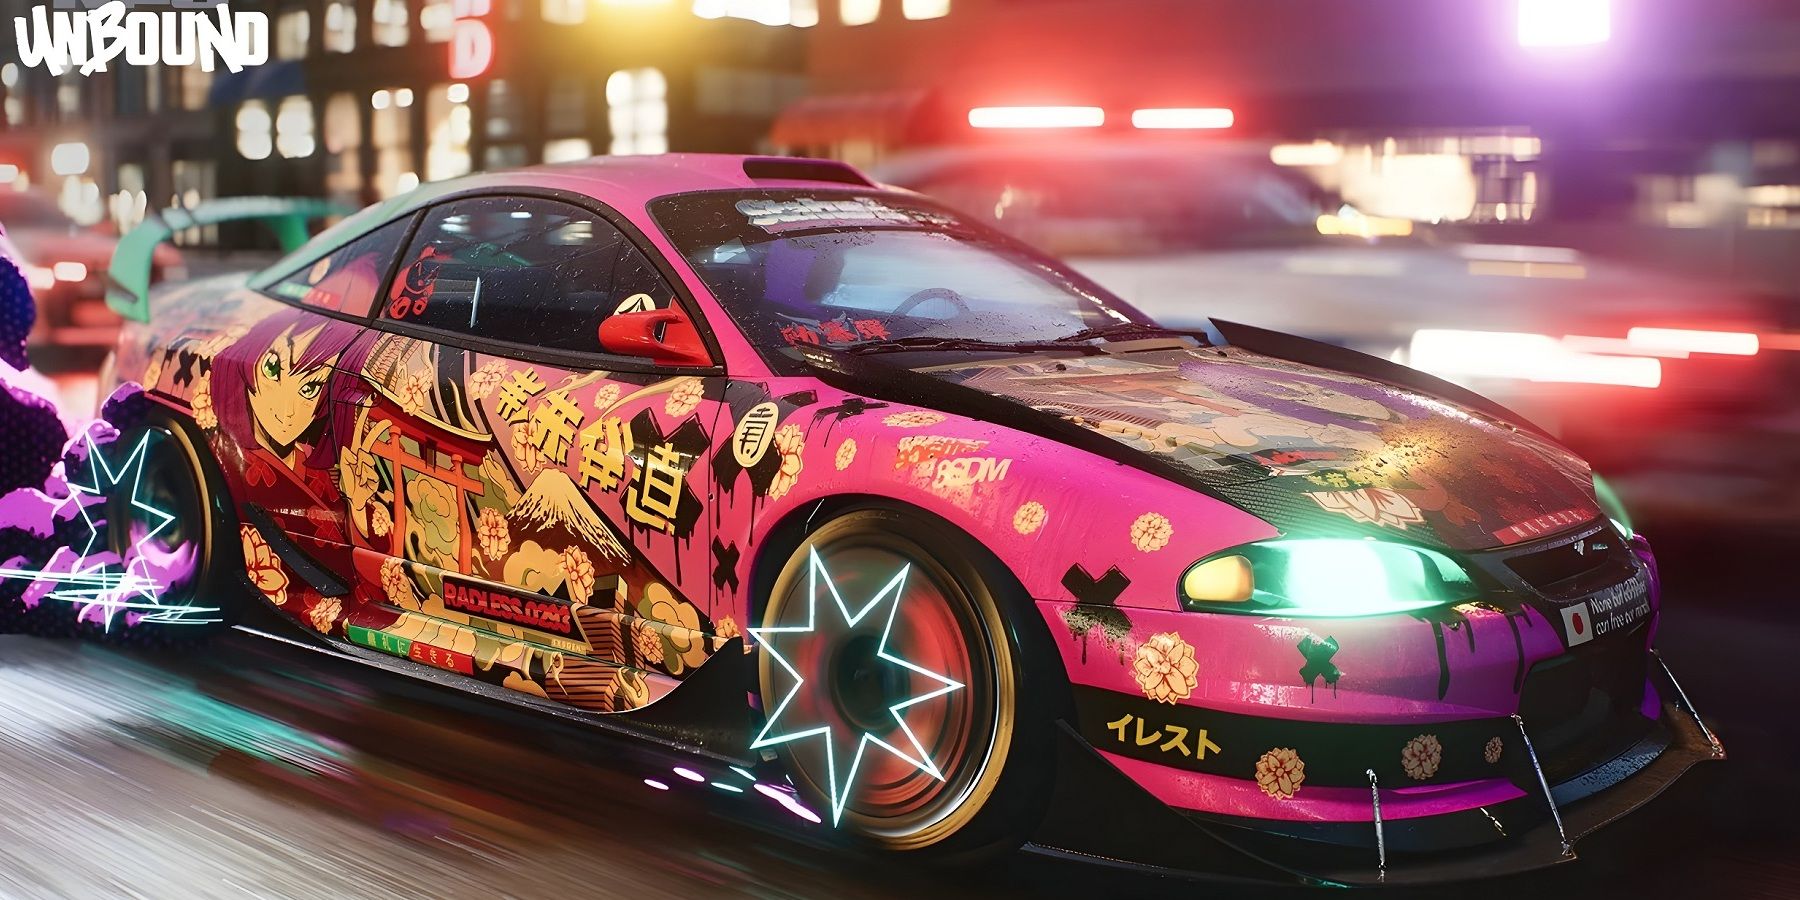 Need for Speed Unbound Confirms Frame Rate, Resolution
Details for PS5 and Xbox Series X